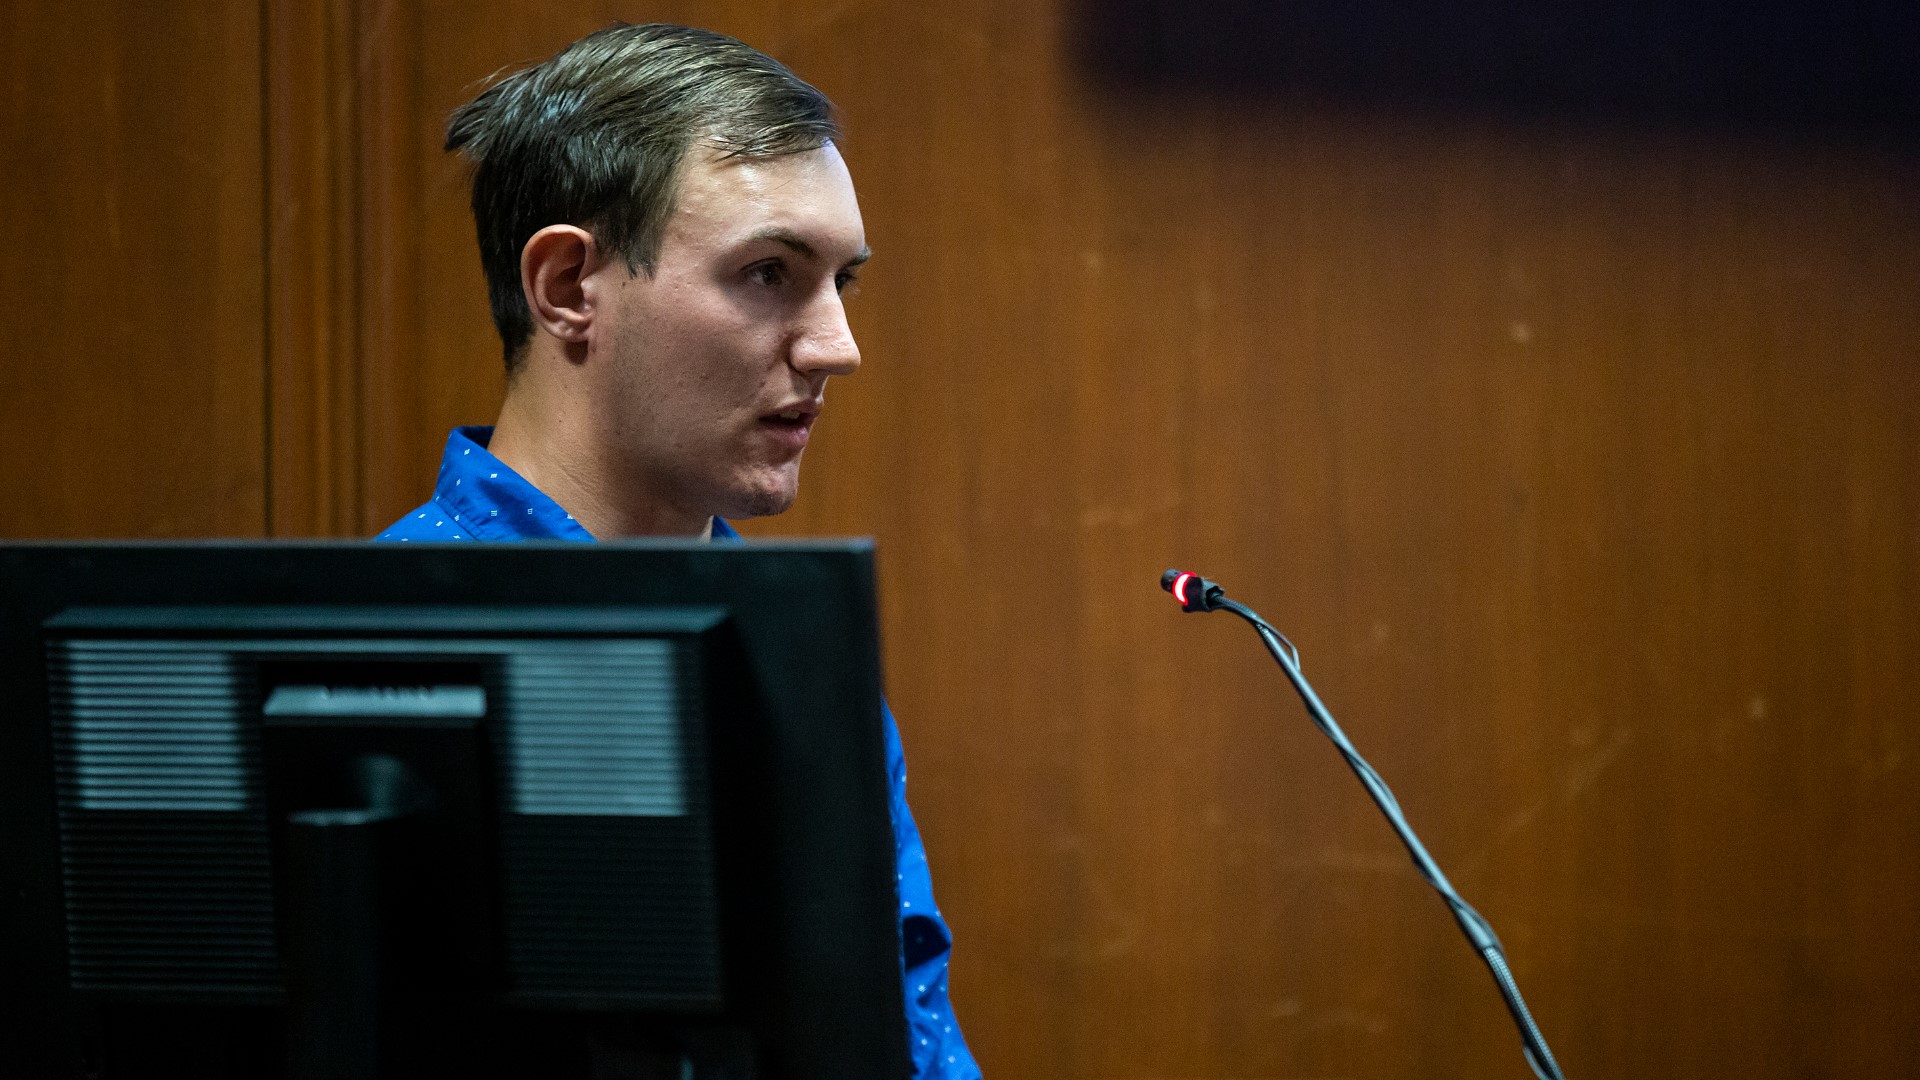 DNA expert Dr. Michael Spence, the mother of Bahena Rivera's child and Dalton Jack, Tibbetts' boyfriend, all testified Tuesday.